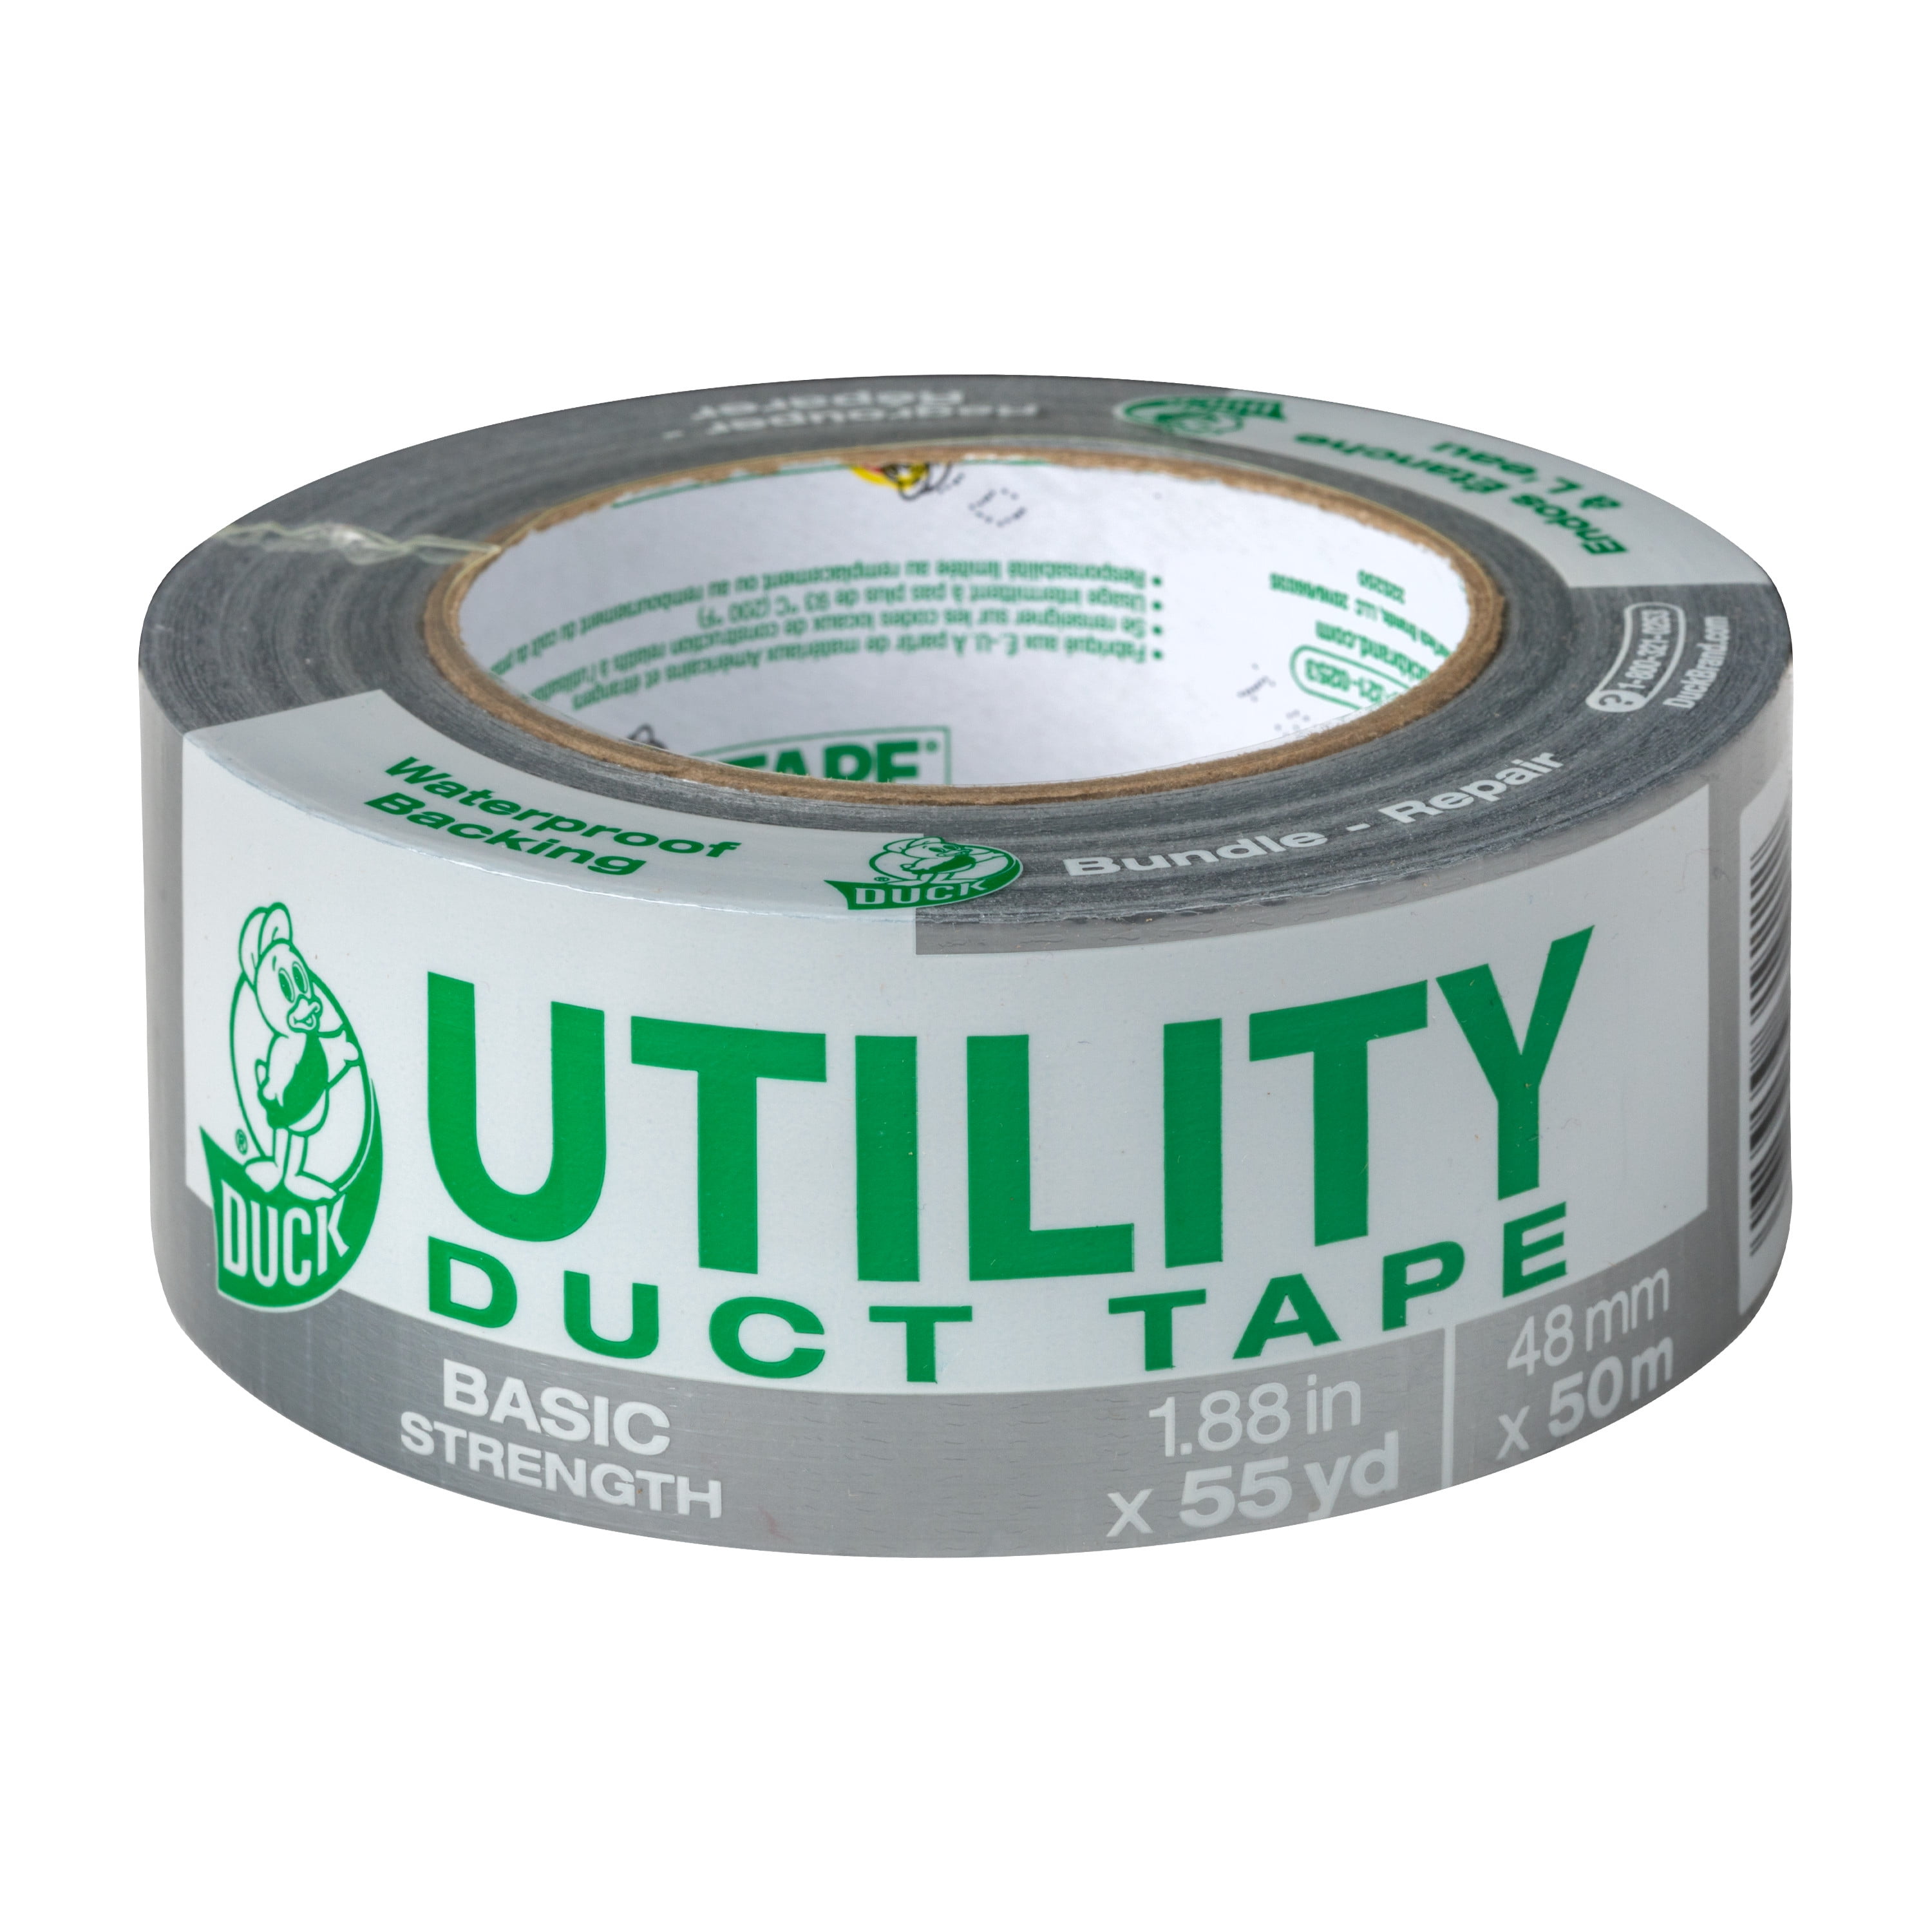 Duck Brand 1.88 in. x 55 yd. Silver Utility Duct Tape 